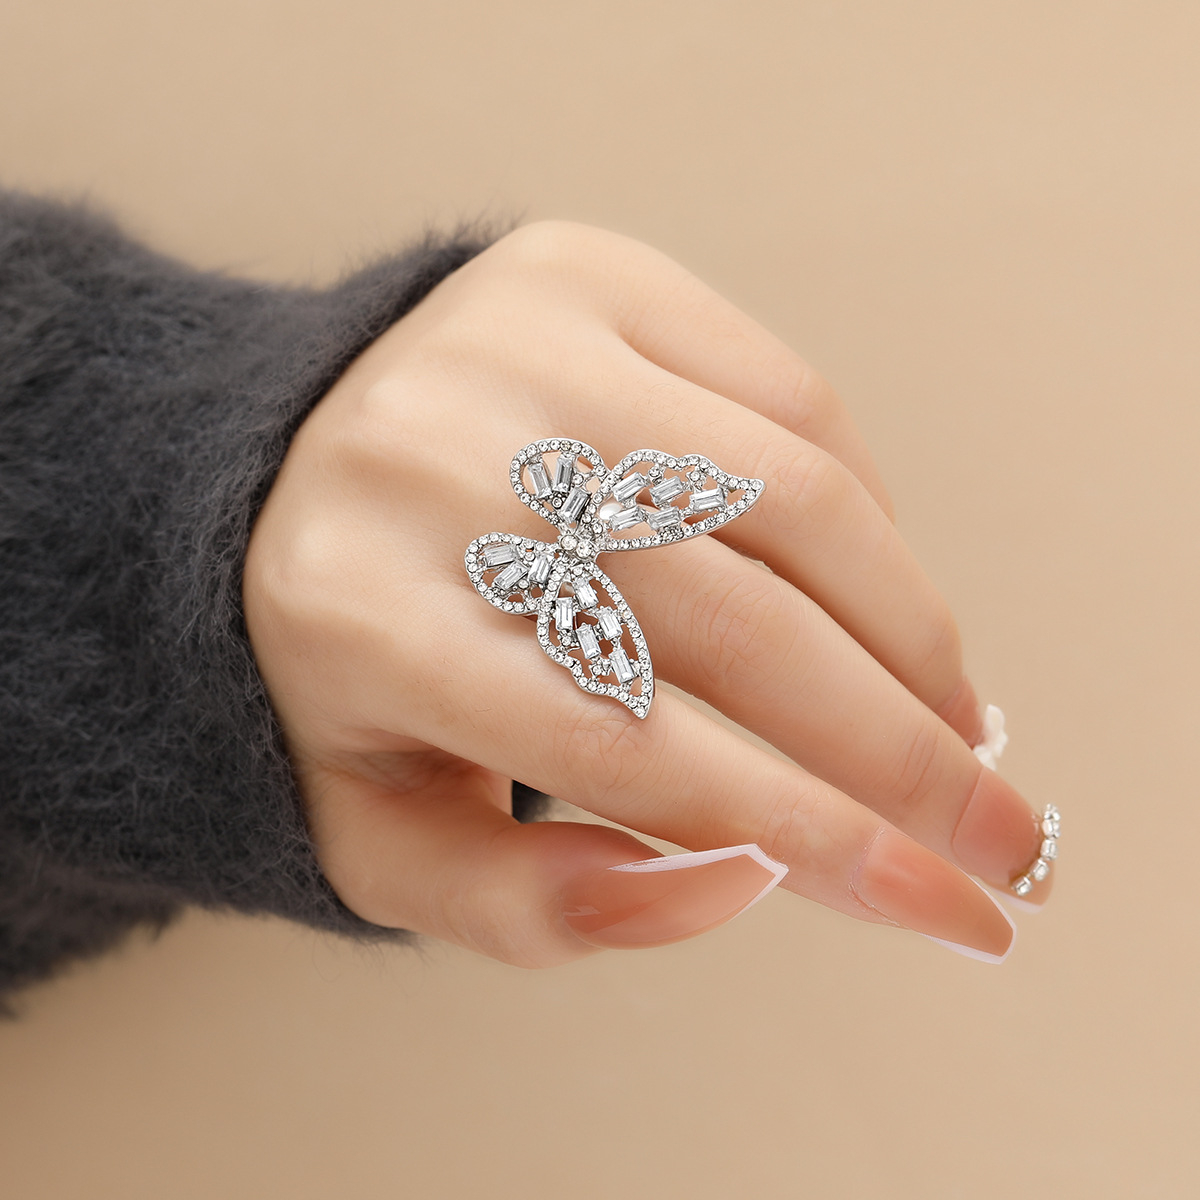 5684201 Butterfly Crystal Rings Romantic Silver Color Rings for Women Hollow Open Rings for Girls Irregular Gifts Ring Accessories